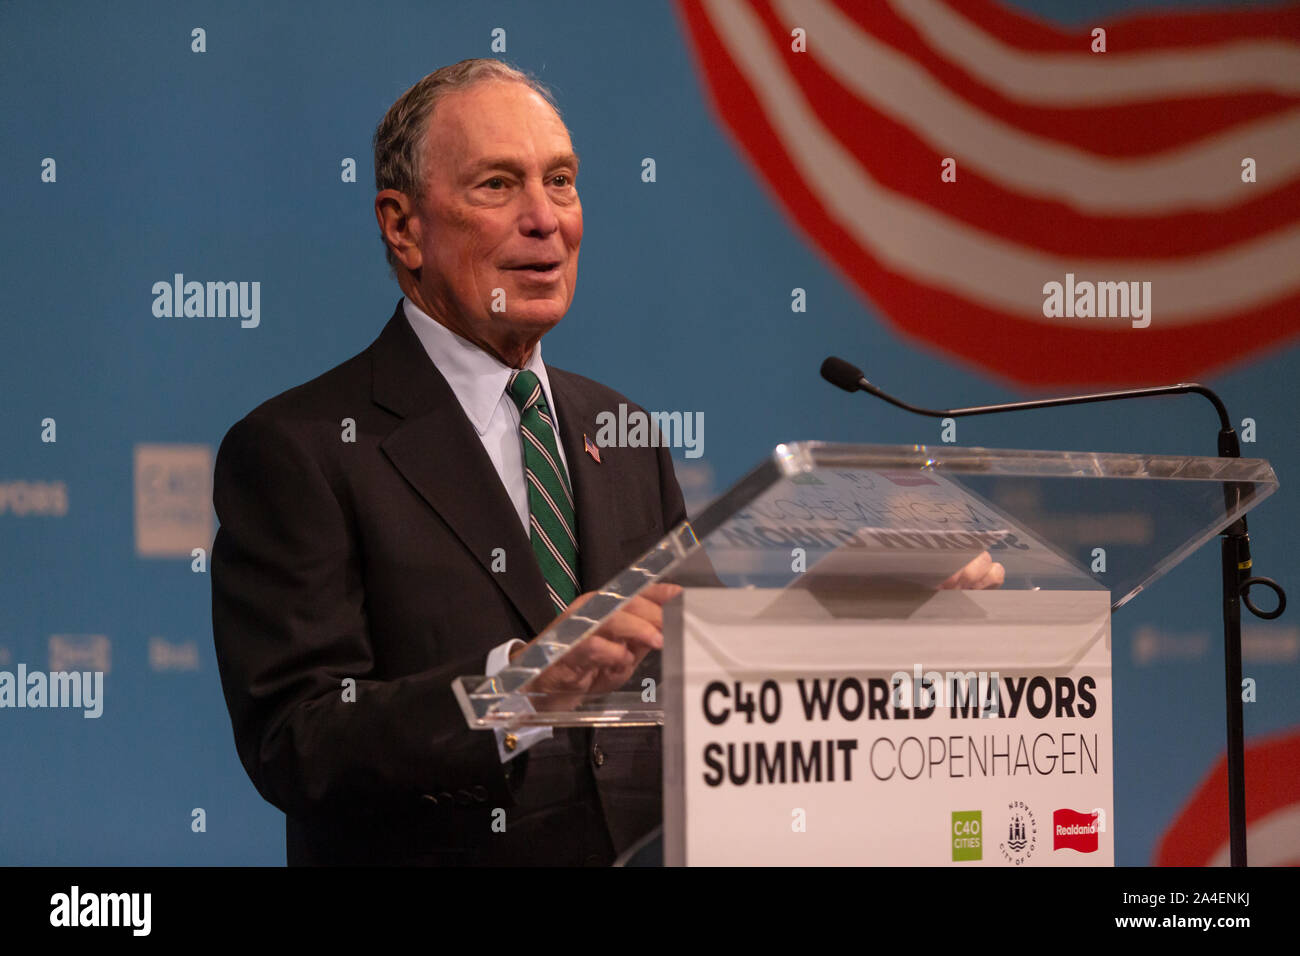 COPENHAGEN, DENMARK -  OCTOBER 10, 2019:  Michael Bloomberg,  President of the C40 Board and former Mayor of New York City, seen at the C40 World Mayors Summit 2019 press conference for Antonio Guterres,  Secretary-General of the United Nations, in Copenhagen. More than 90 mayors of some of the world’s largest and most influential cities representing some 700 million people meet in Copenhagen from October 9-12 for the C40 World Mayors Summit. The purpose with the Summit in Copenhagen is to build a global coalition of leading cities, businesses and citizens that rallies around radical and ambit Stock Photo